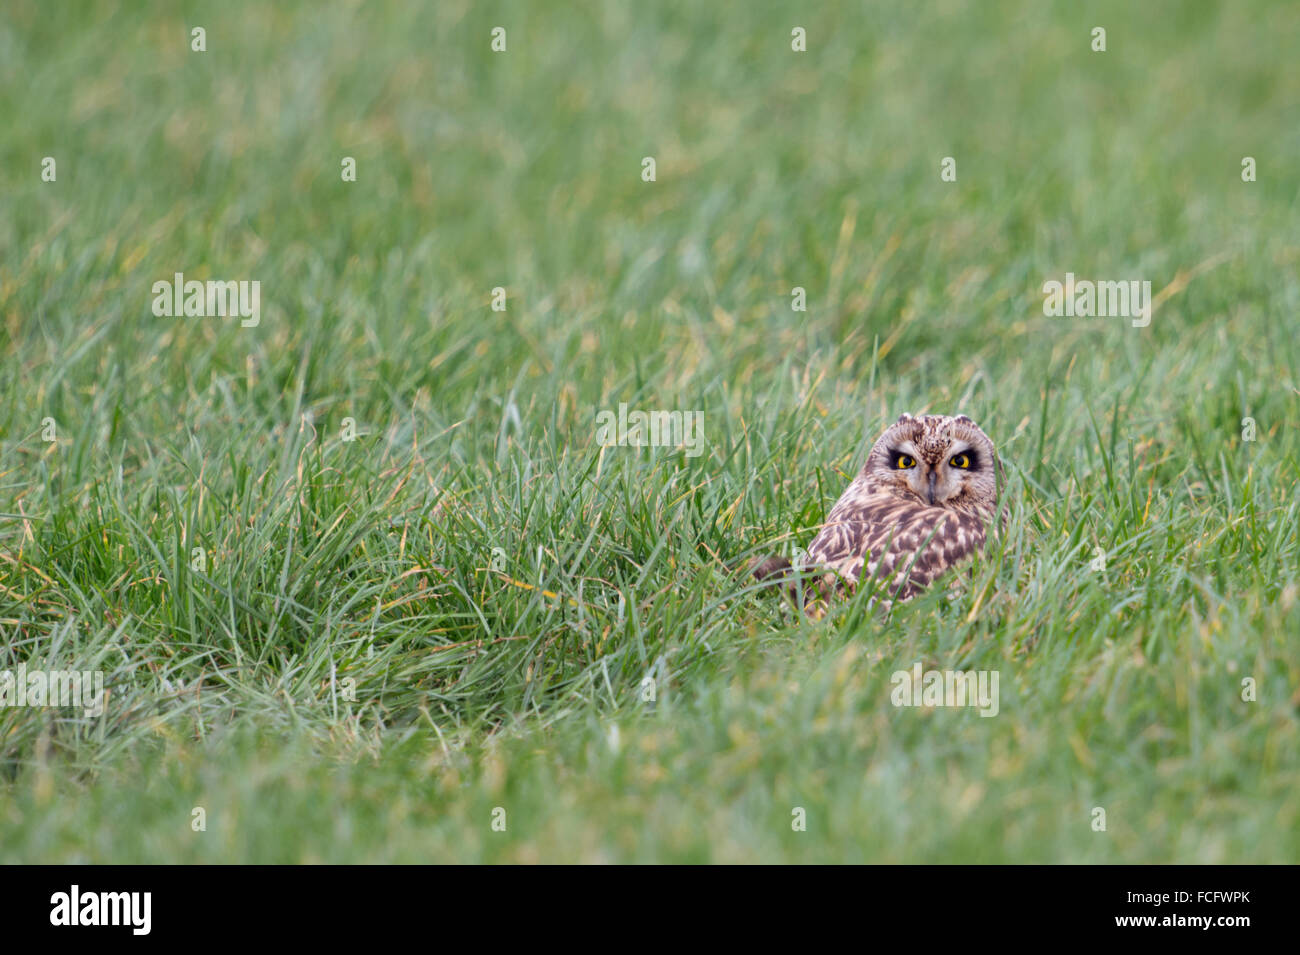 Short-eared Owl / Sumpfohreule ( Asio flammeus ) hides in green grass of a pasture, looks back over its shoulder. Stock Photo